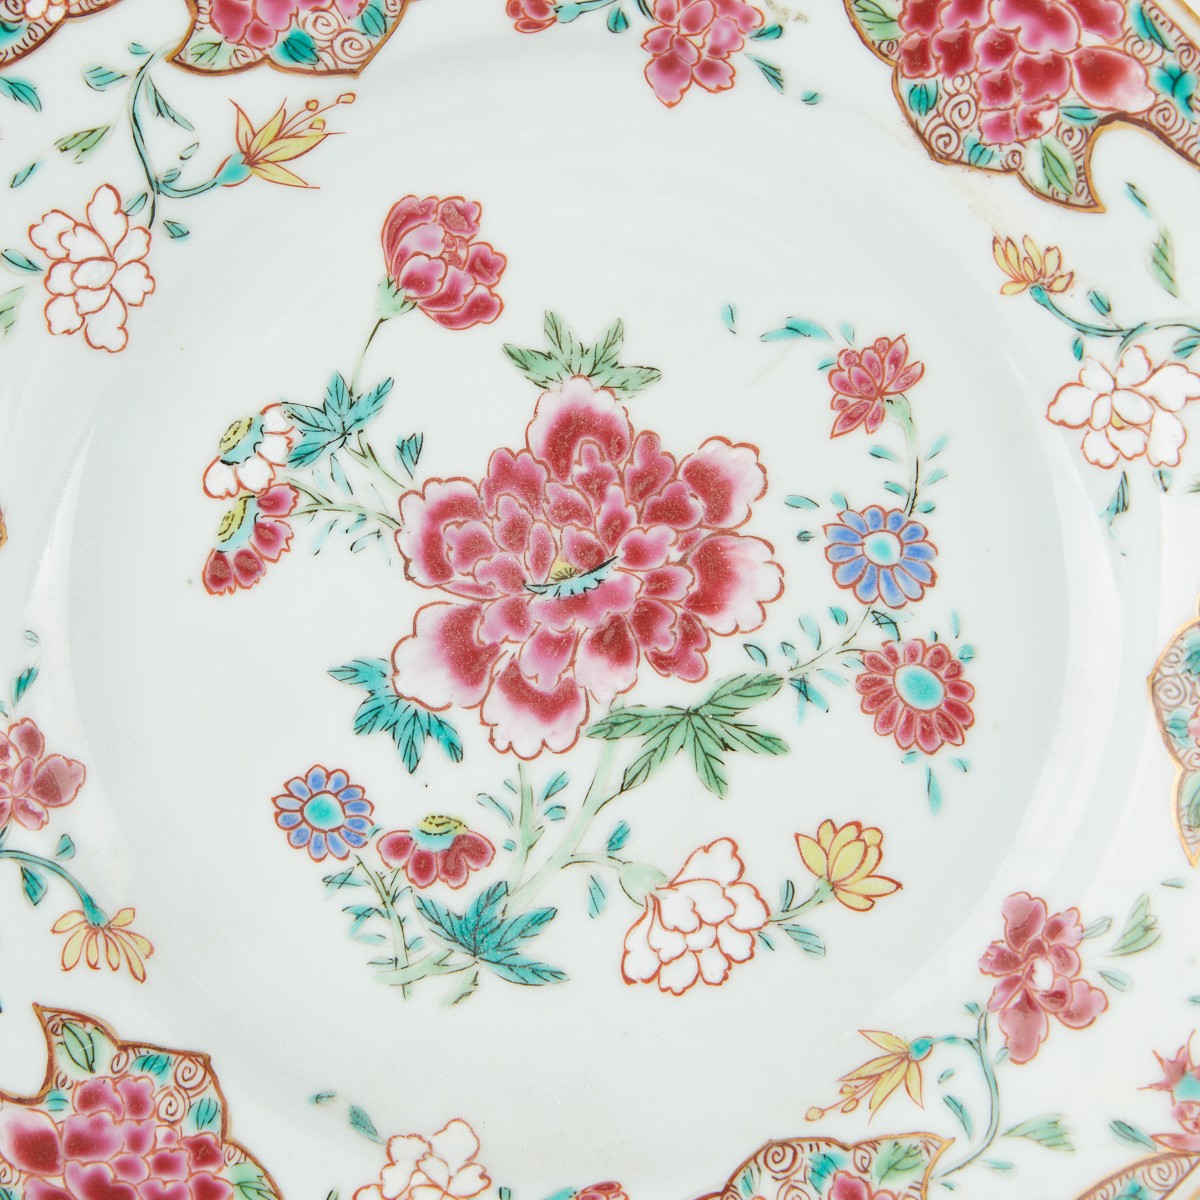 Grp: 2 18th c. Chinese Export Porcelain Plates - Image 4 of 5